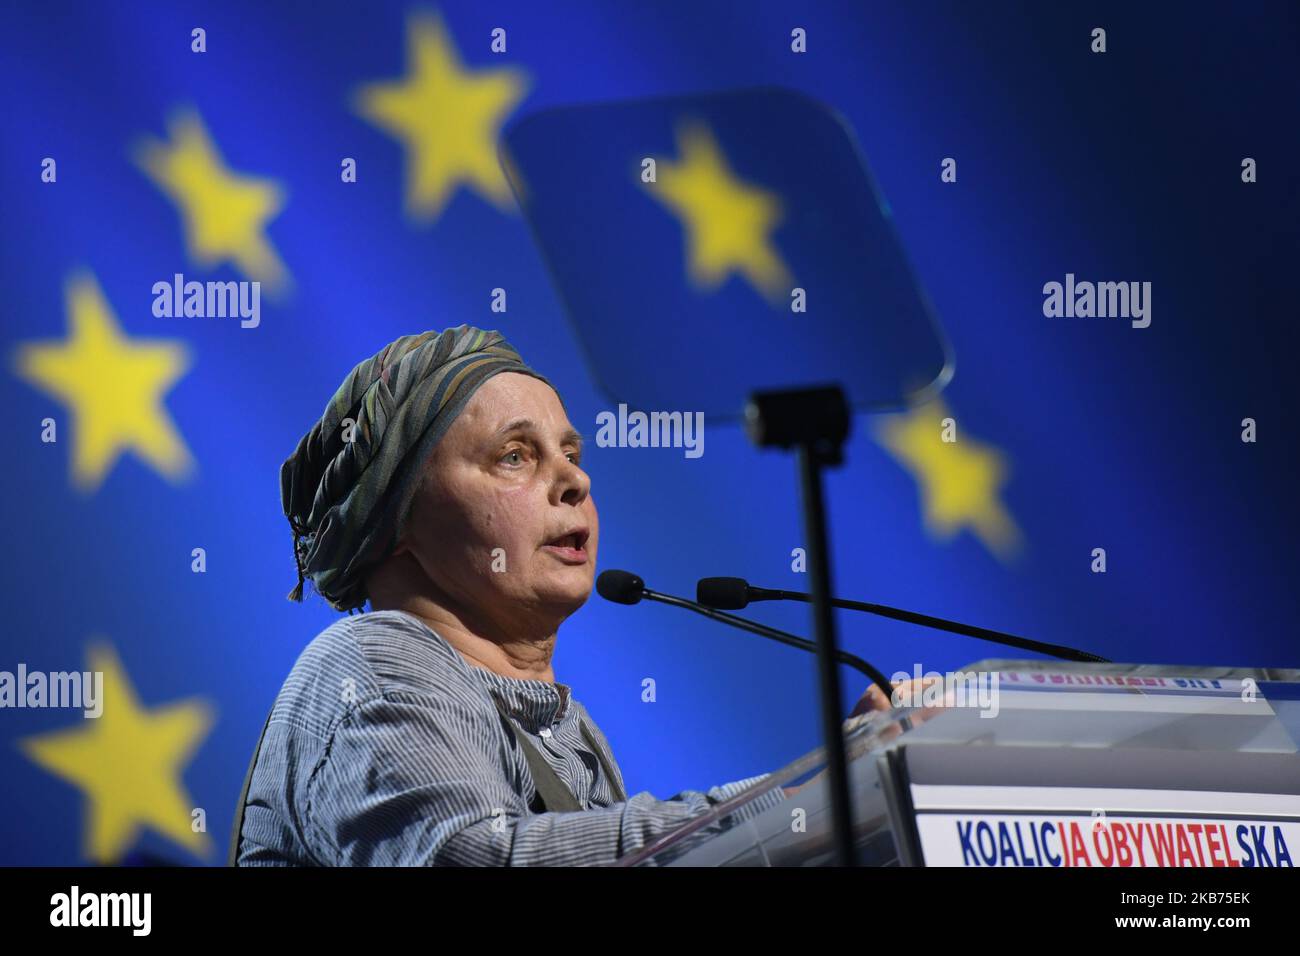 Janina Ochojska, a Polish Member of the European Parliament, an astronomer, humanitarian and social activist, and founder of the Polish Humanitarian Action, speaks during the Civic Coalition election campaign convention in Krakow, ahead of the 2019 Polish parliamentary election on Sunday, October 13, 2019. On Saturday, September 28, 2019, in Krakow, Poland. (Photo by Artur Widak/NurPhoto) Stock Photo